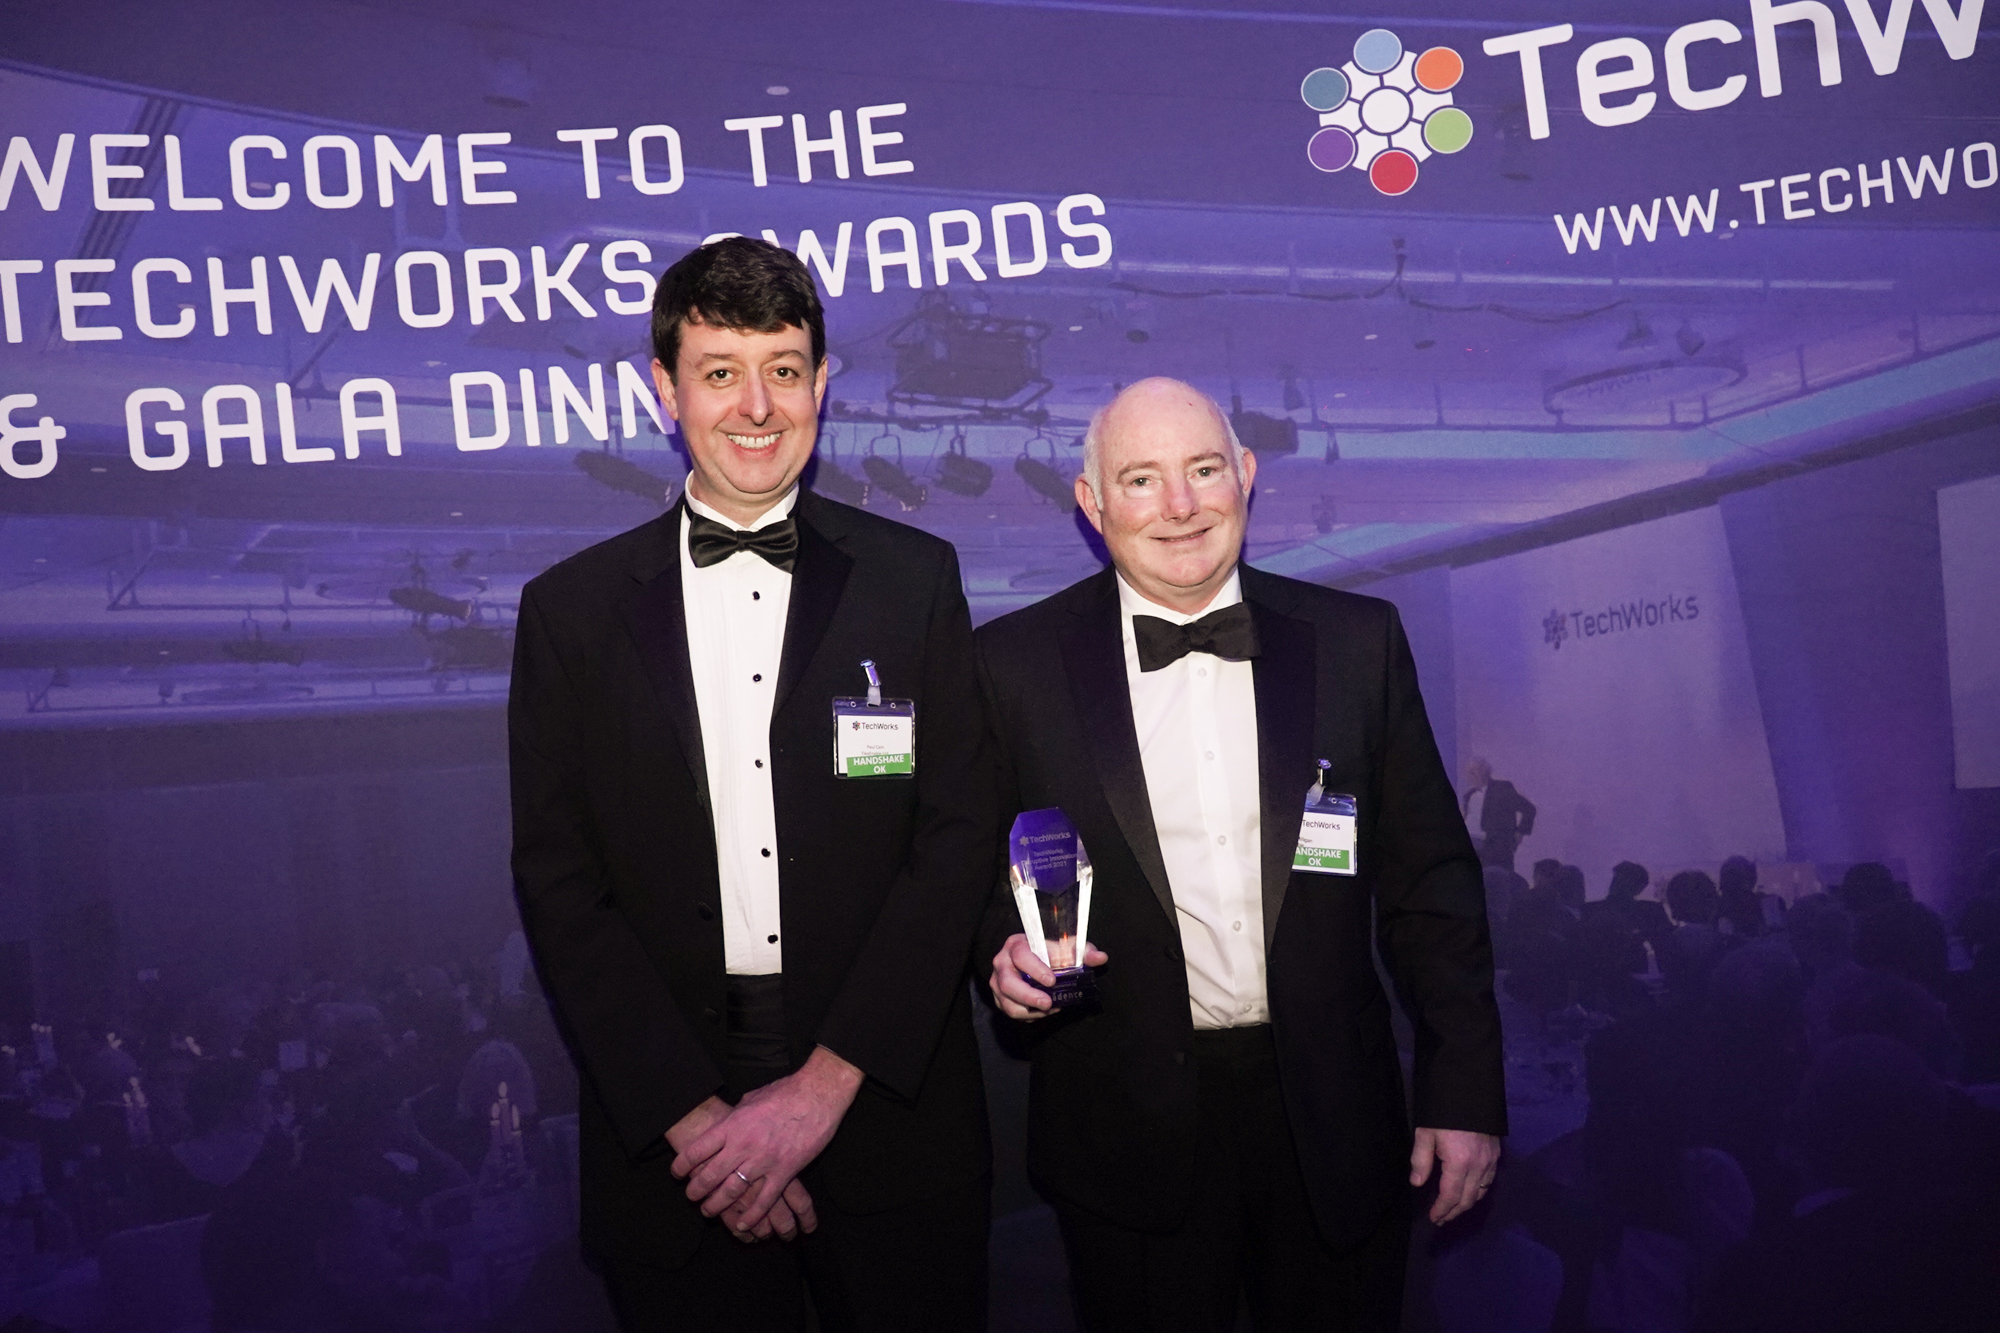 FlexEnable’s CEO, Chuck Milligan (right), and Strategy Director, Paul Cain, receive the 2021 TechWorks Disruptive Innovation Award